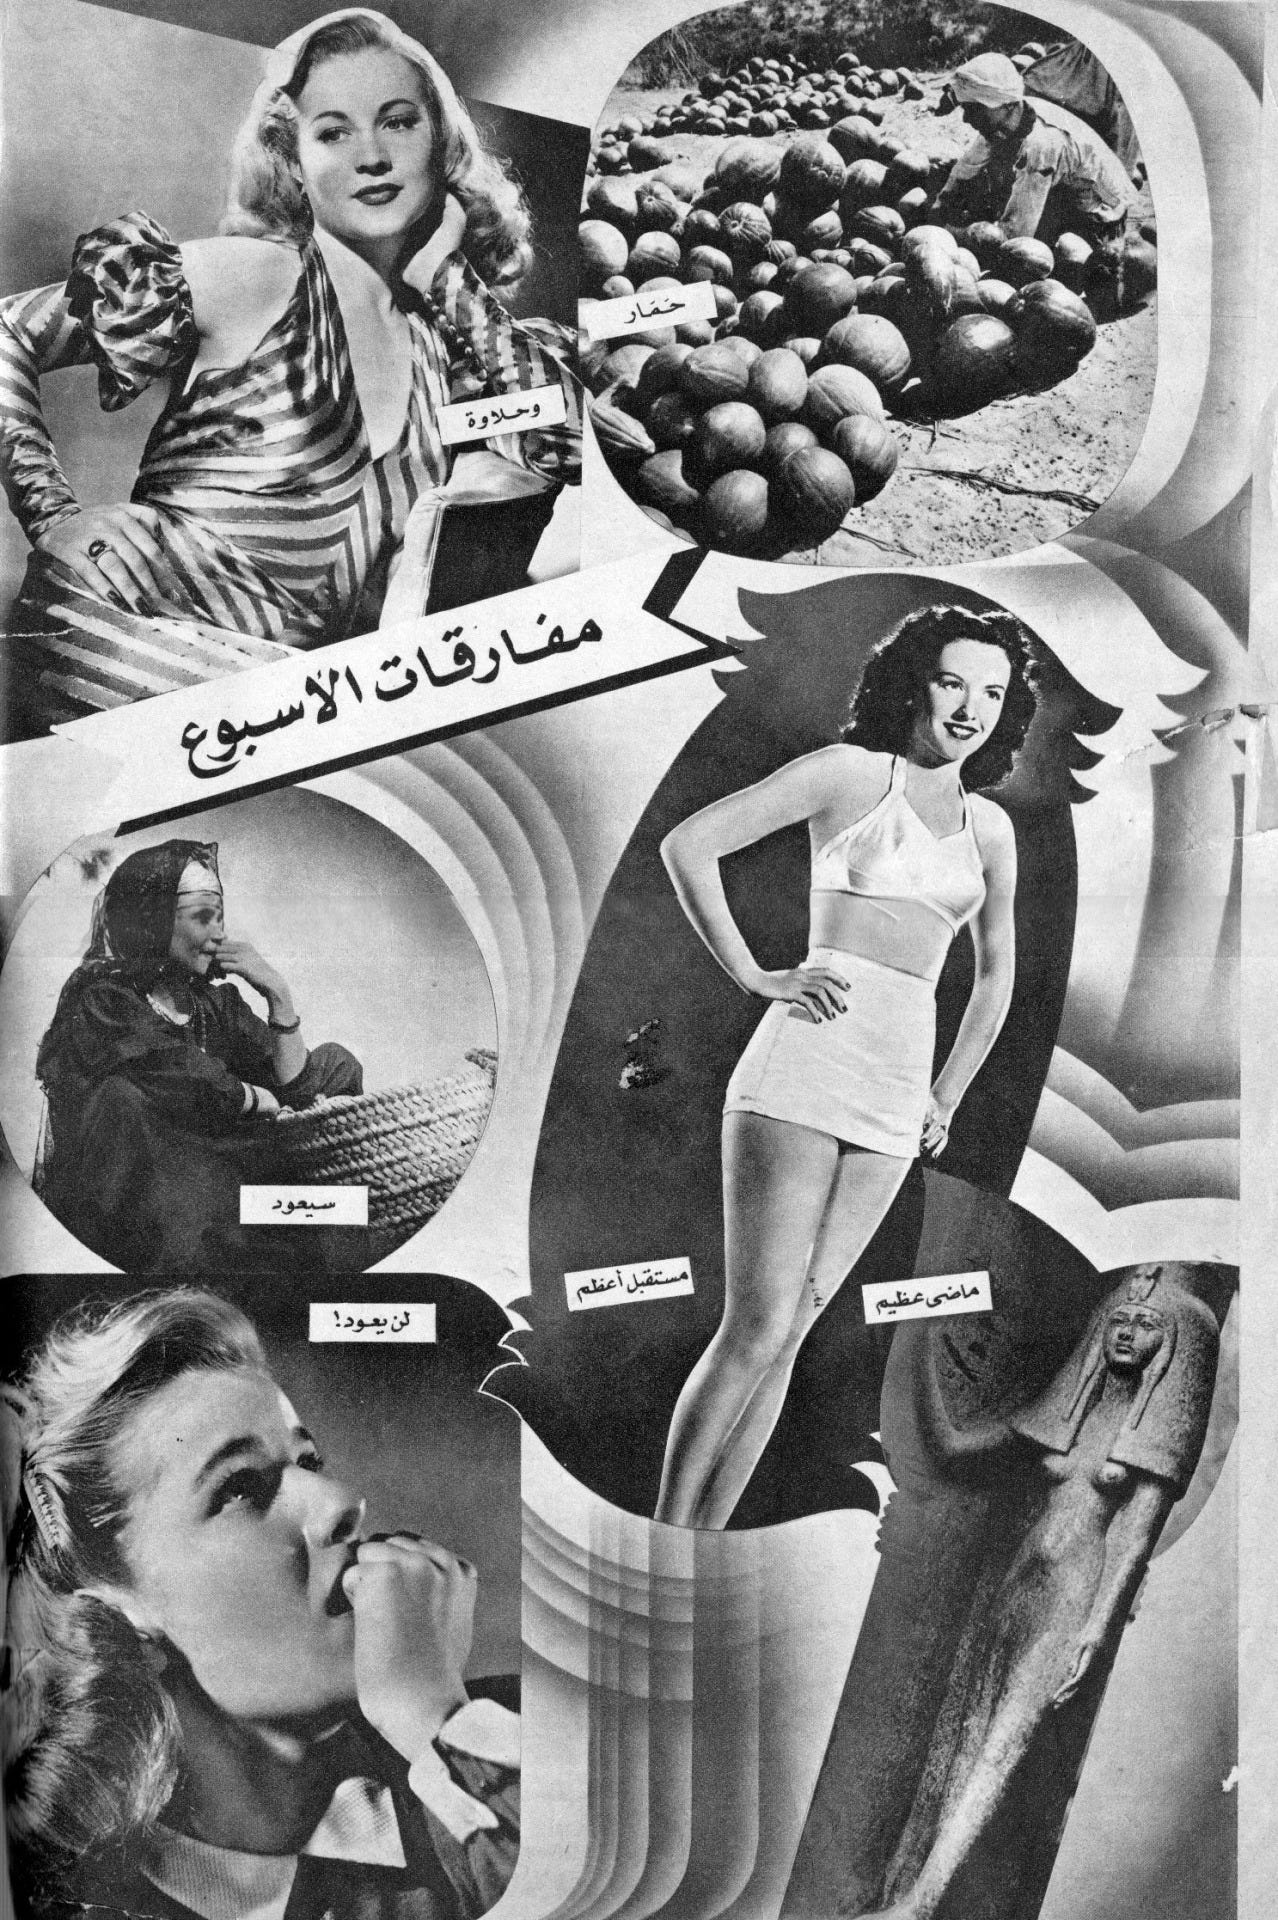 The inside cover of a 1949 issue of Akher Saa magazine.